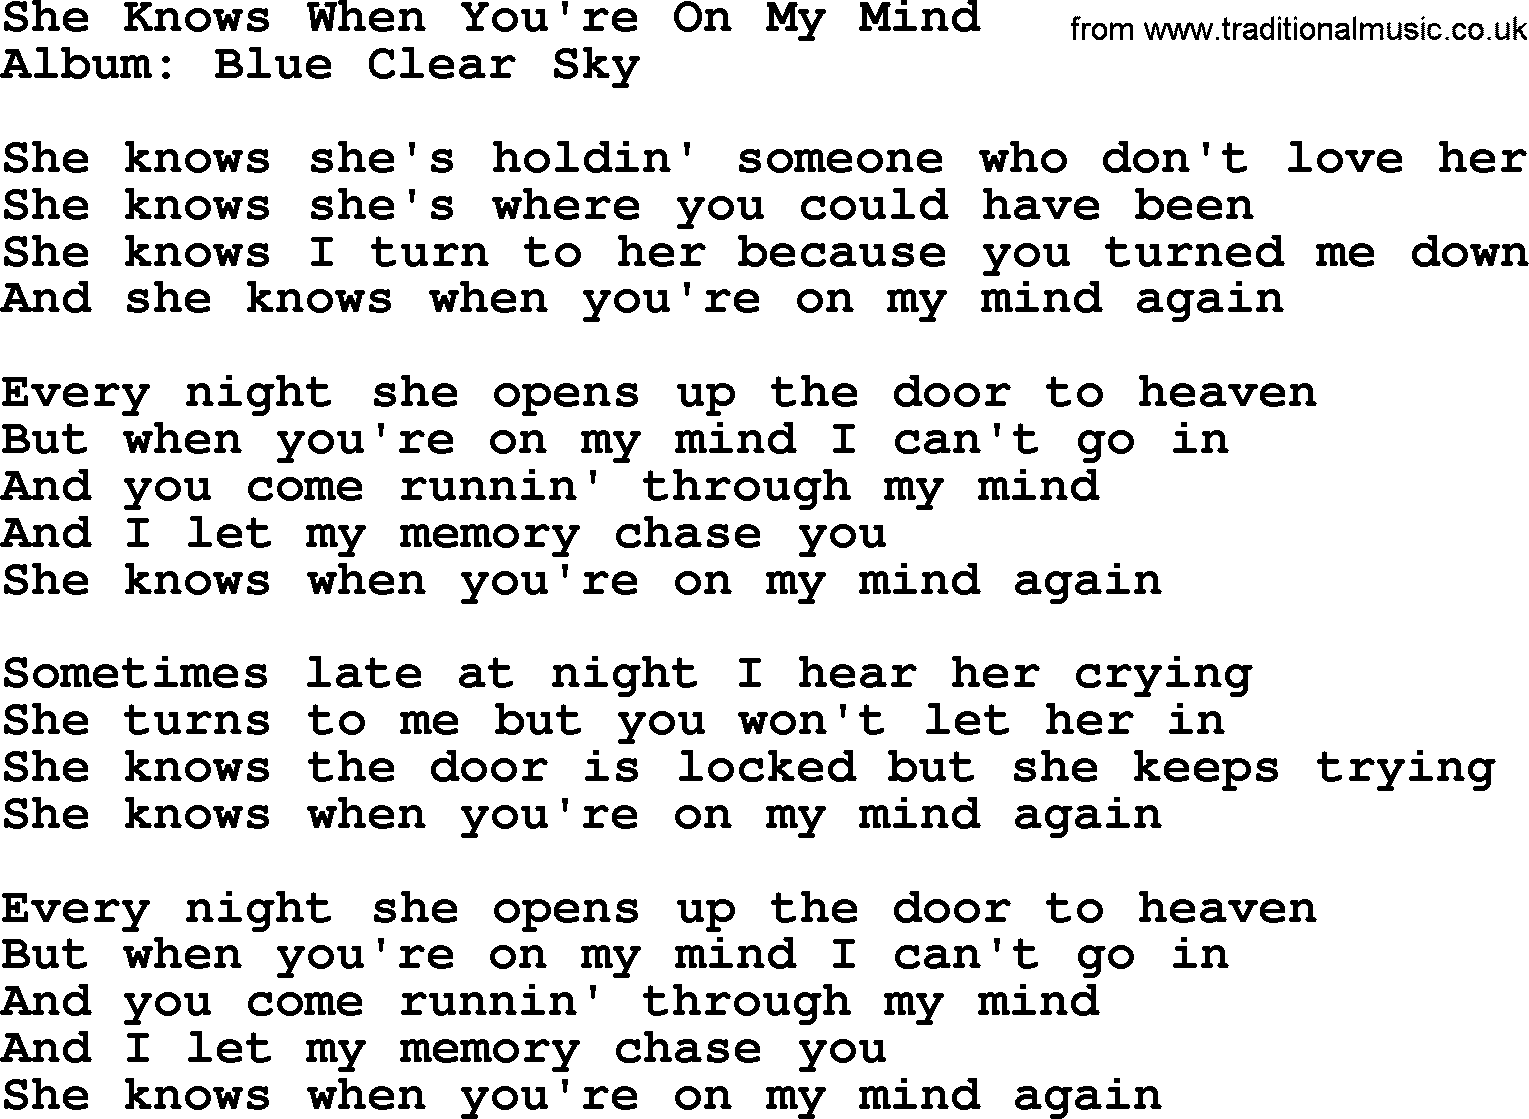 George Strait song: She Knows When You're On My Mind, lyrics